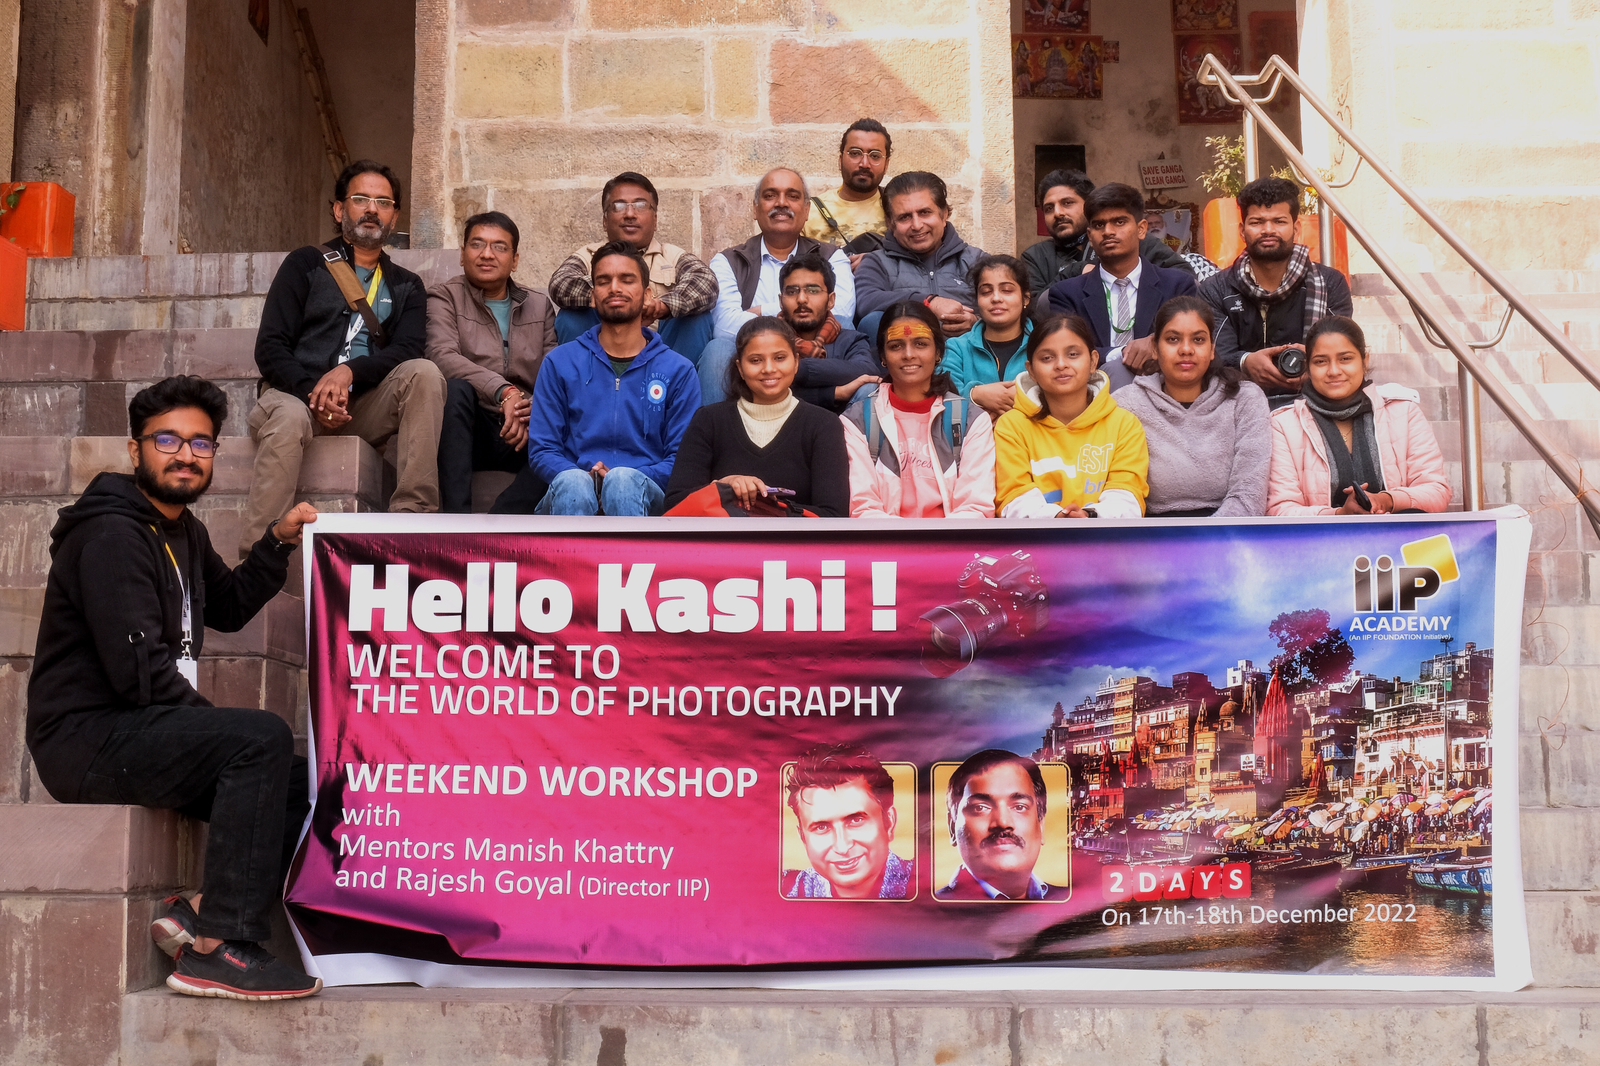 Indian Institute of Photography took the initiative to spread India�s vibrant culture to the future generation